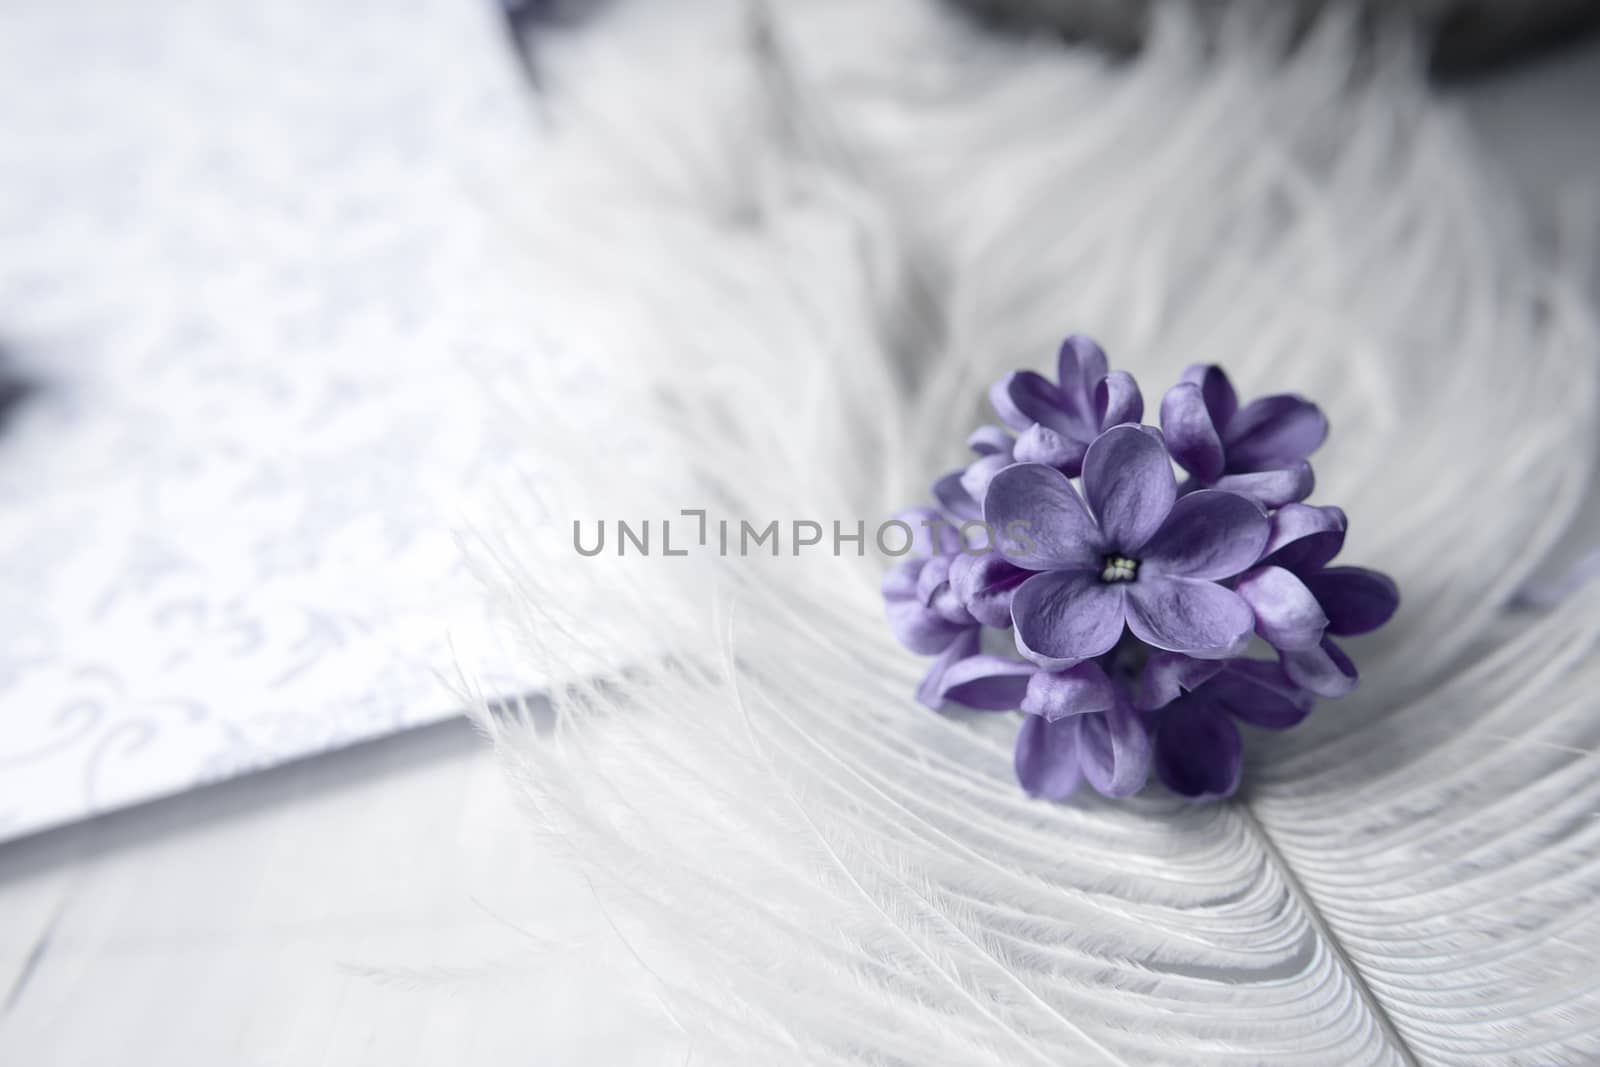 Five-pointed lilac blue violet flowers on a white ostrich feather. A lilac luck - flower with five petals among the four-pointed flowers of bright pink lilac (Syringa)